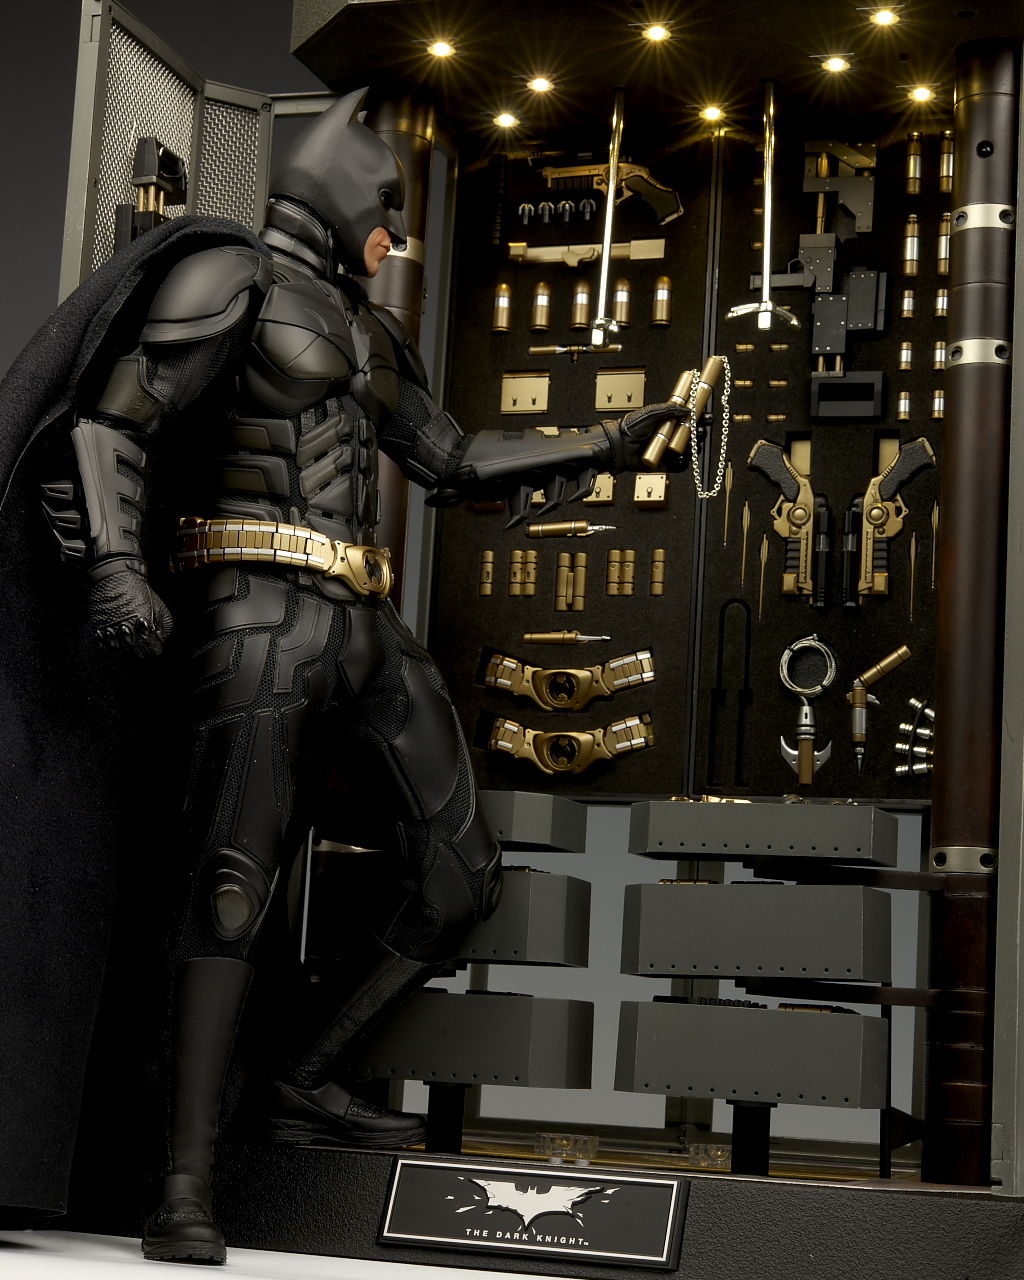 HOT TOYS: THE DARK KNIGHT – Alfred and Batman Armory with Bruce Wayne